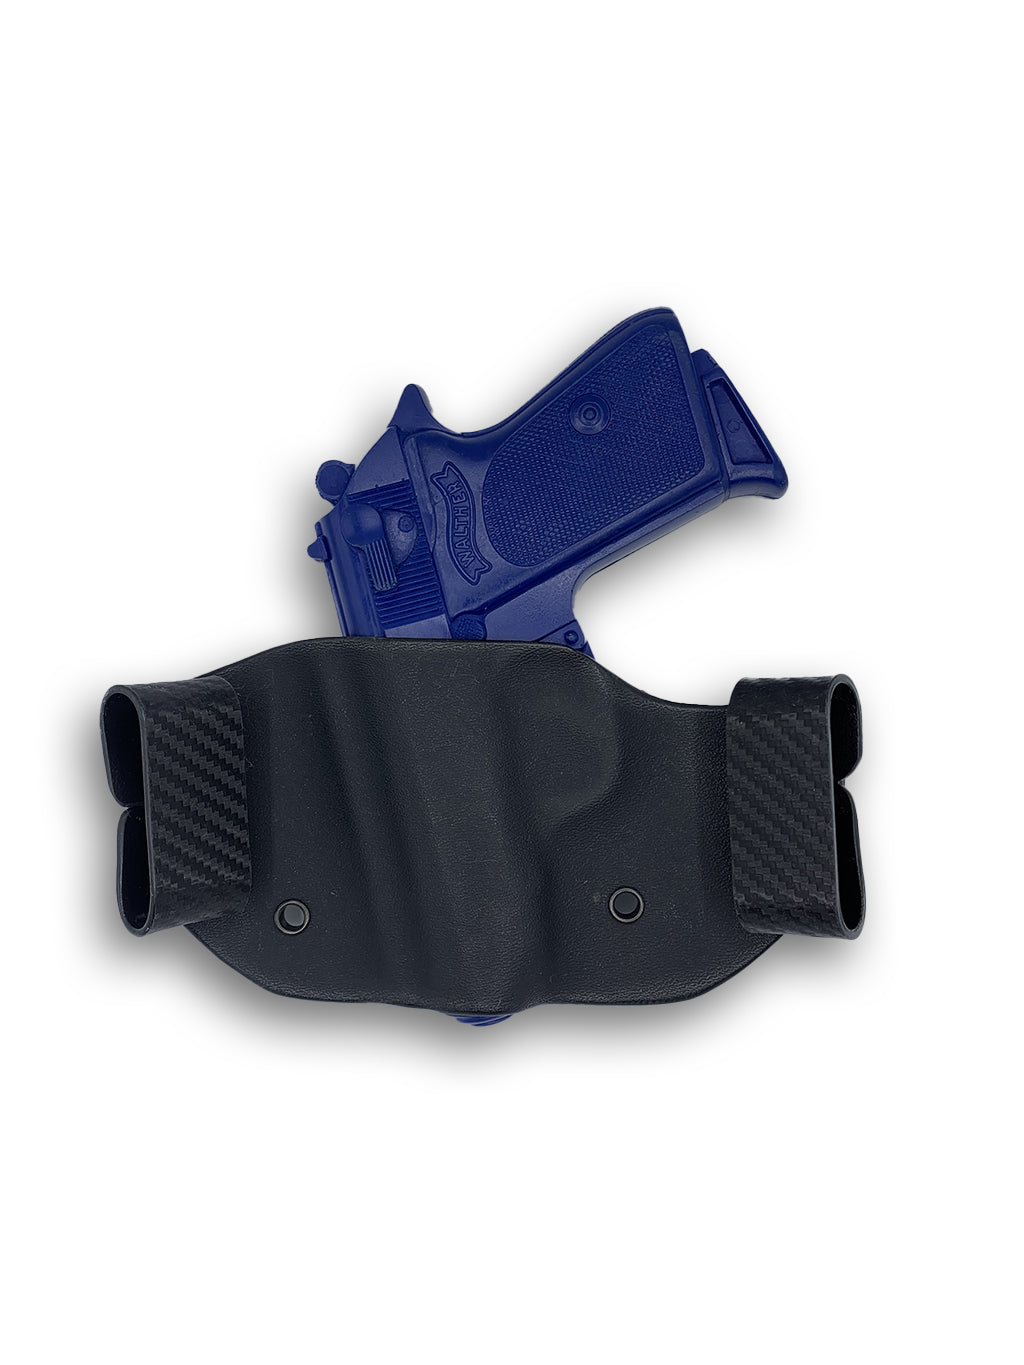 Walther PPK OWB Holster